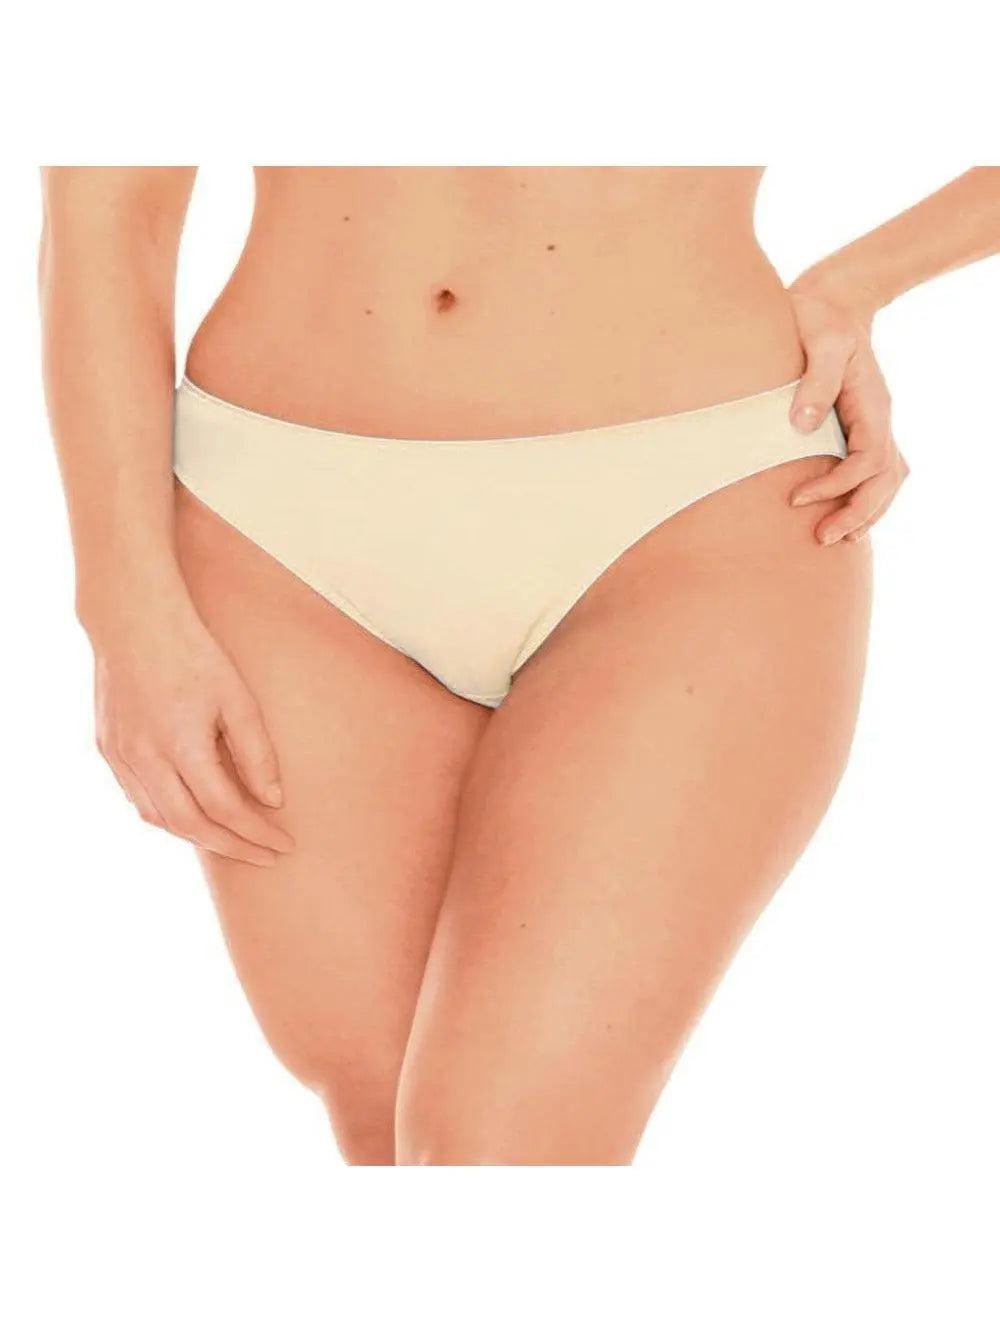 Fit Fully Yours Crystal Smooth thong in champagne color